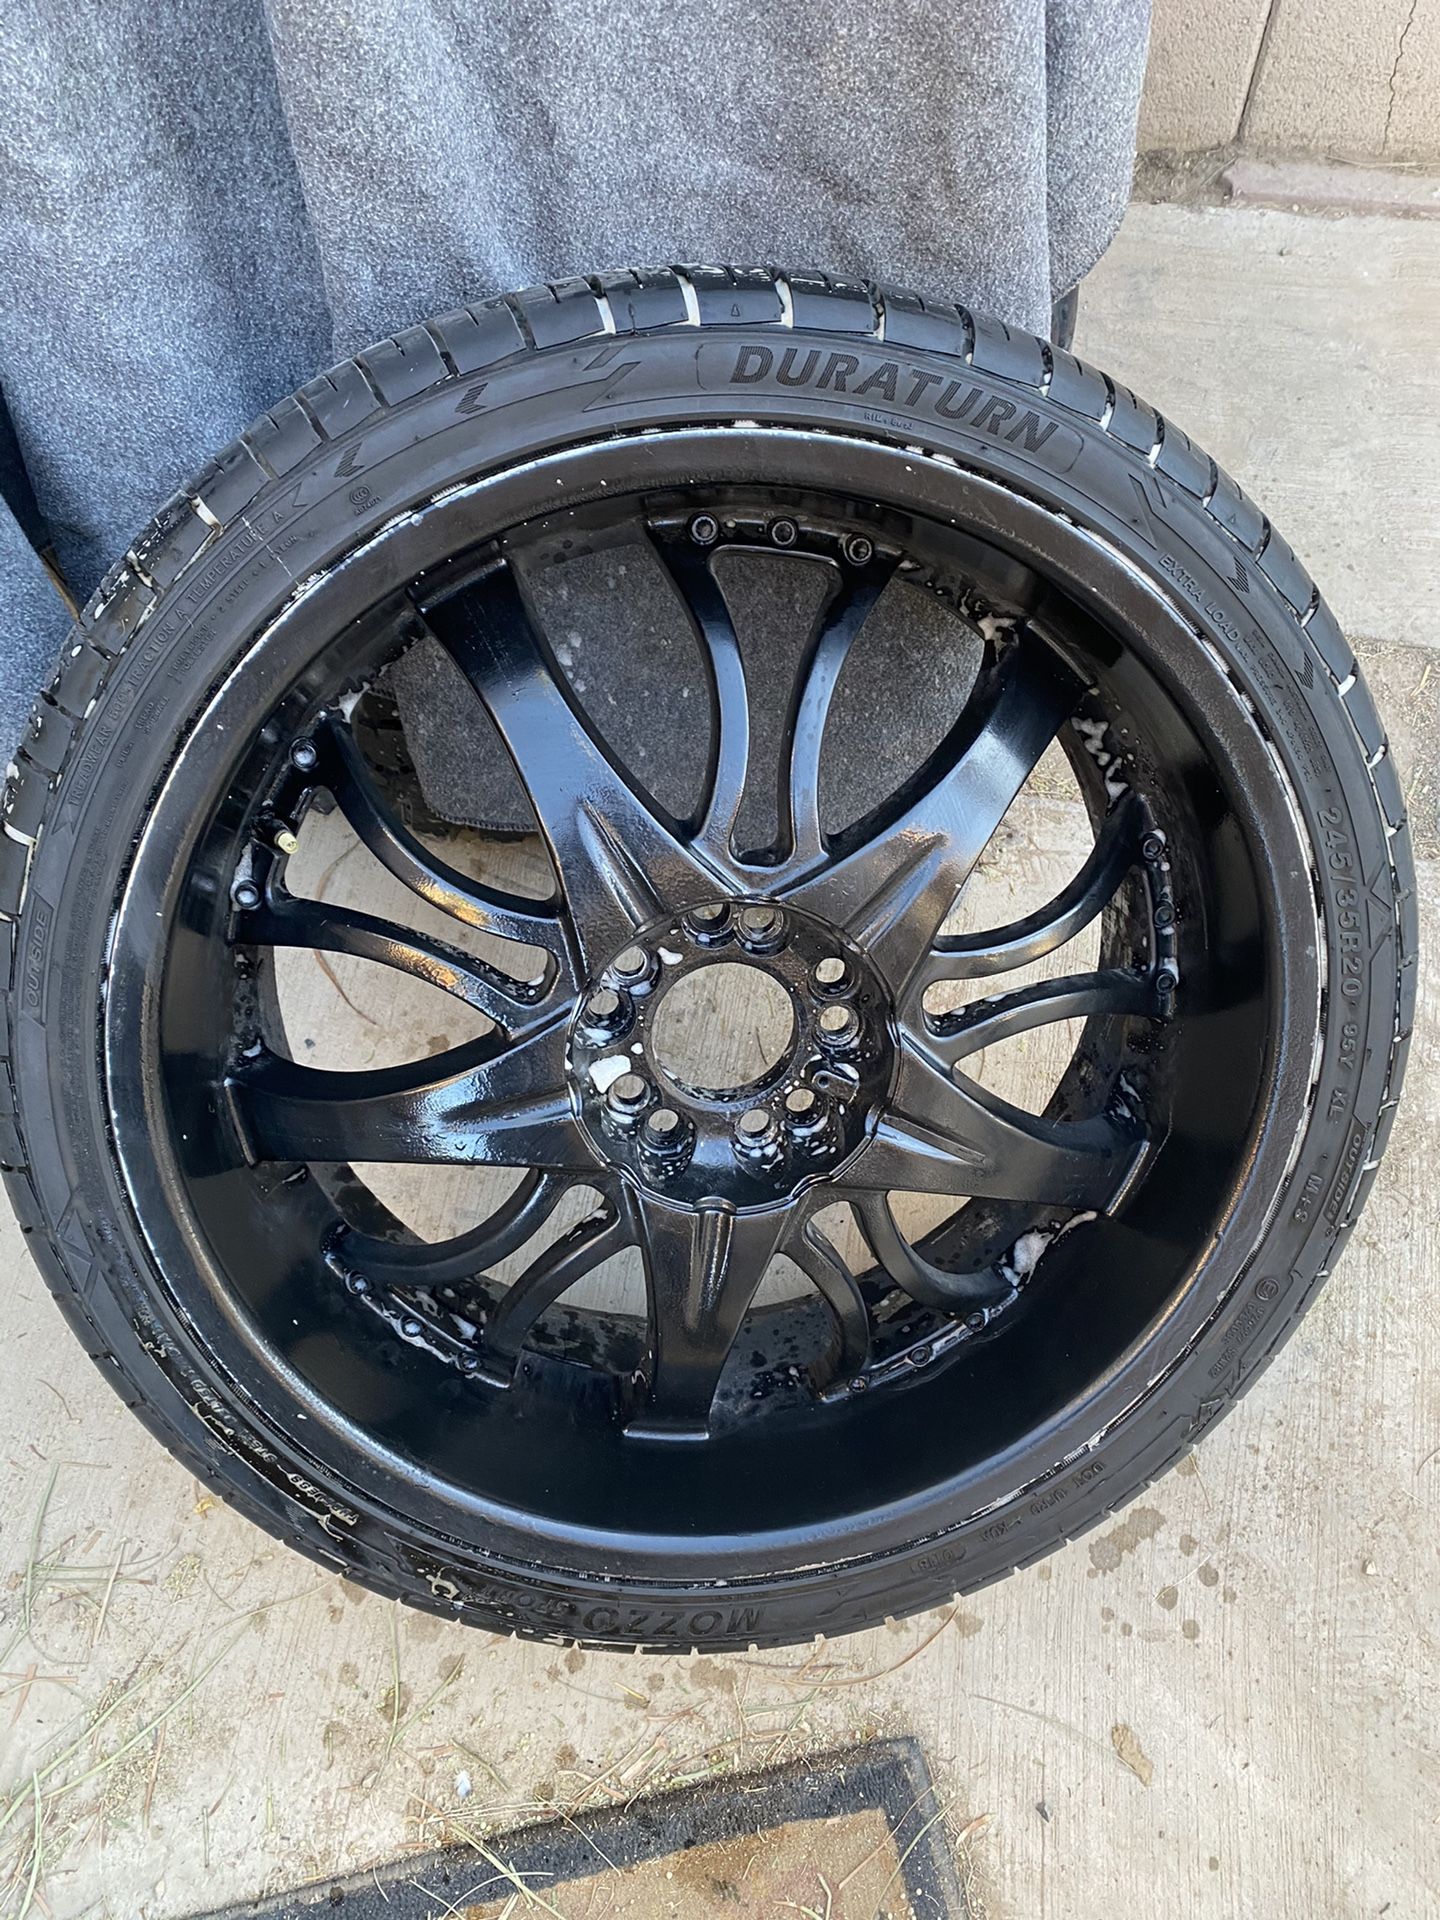 20 Inch Rims For Mustang Brand New Tires Also.